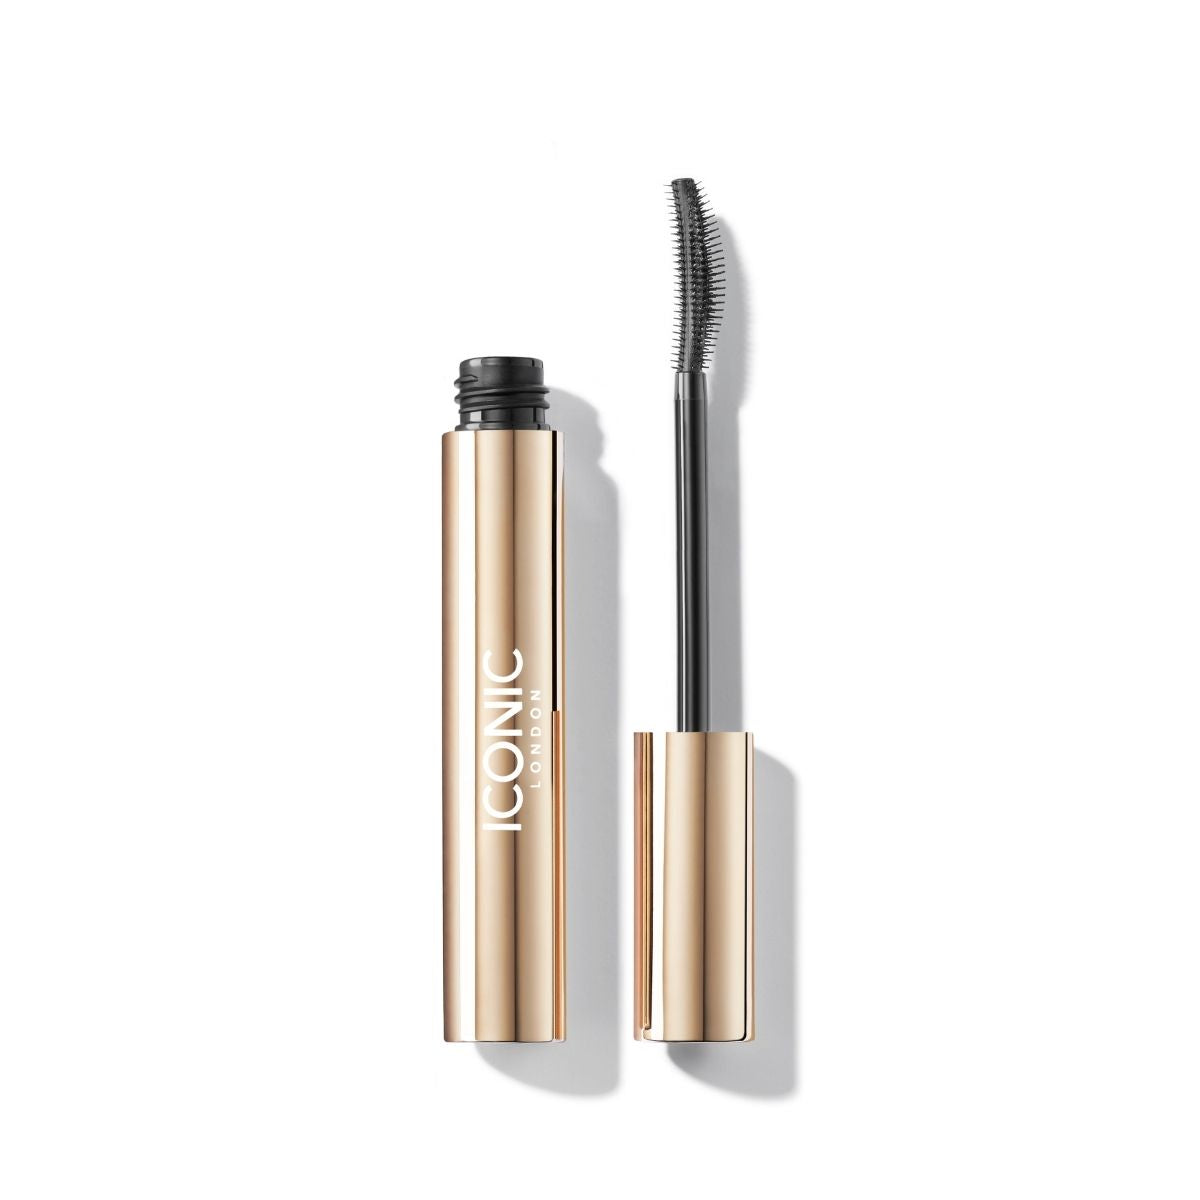 Iconic London Enrich and Elevate Mascara.